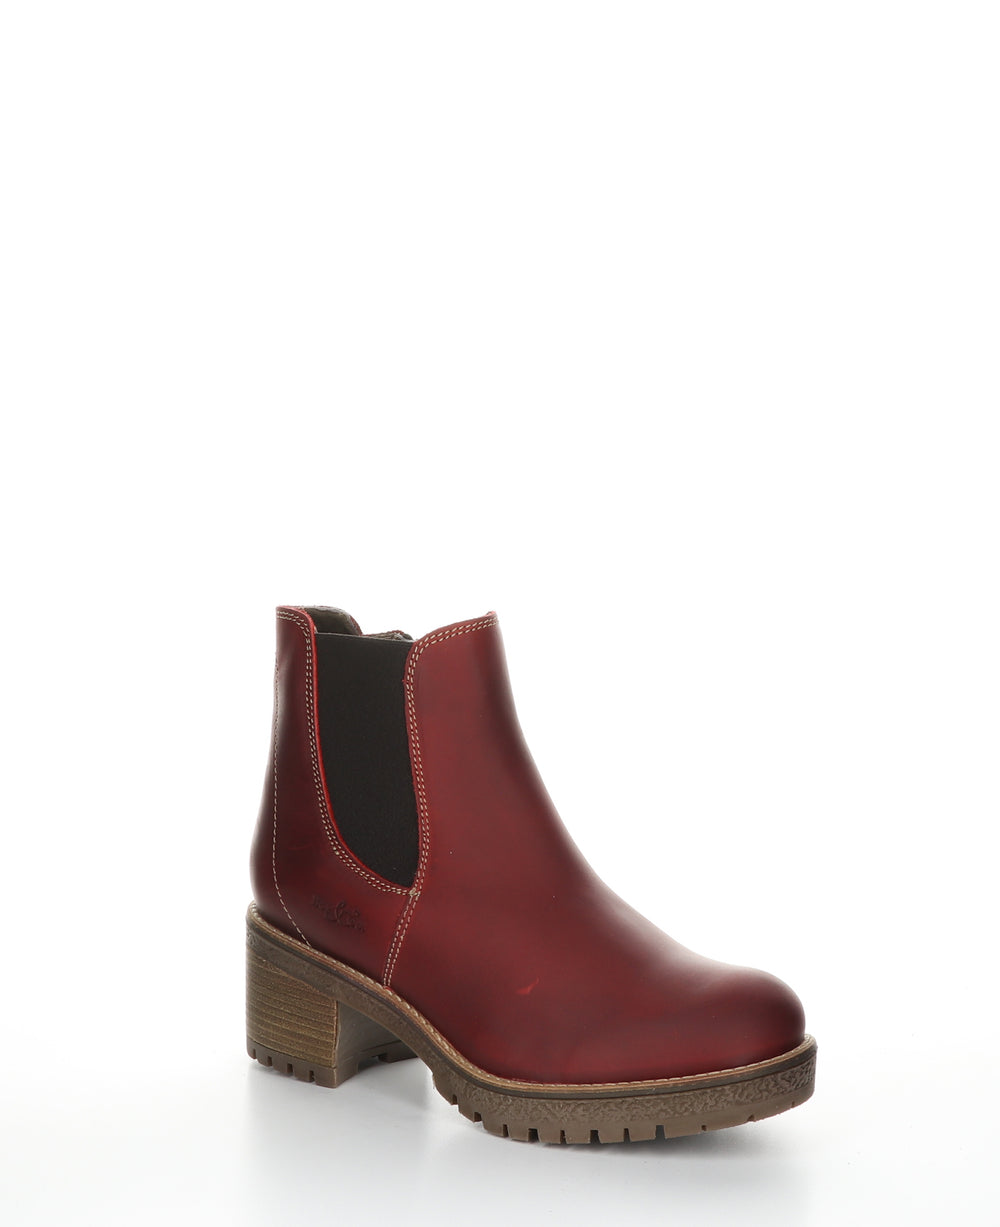 MASS Red Zip Up Ankle Boots